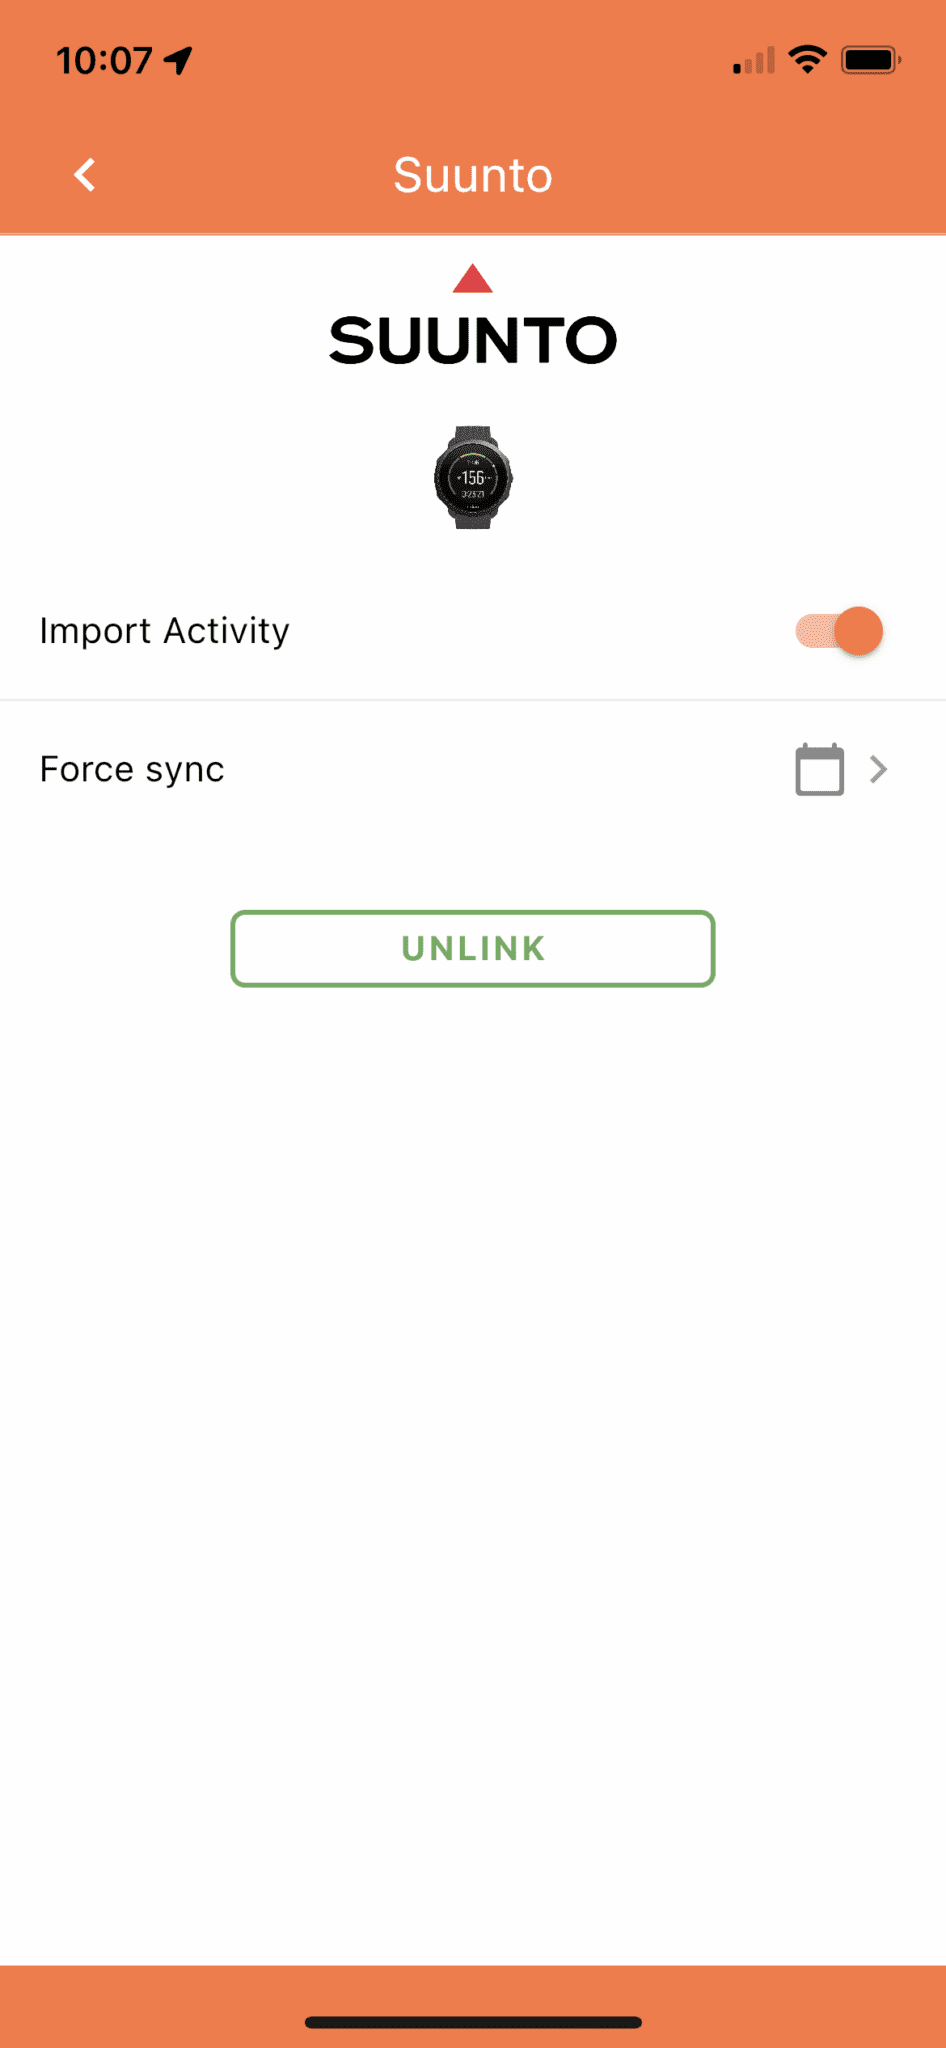 Force sync to backfill data up to a month prior.